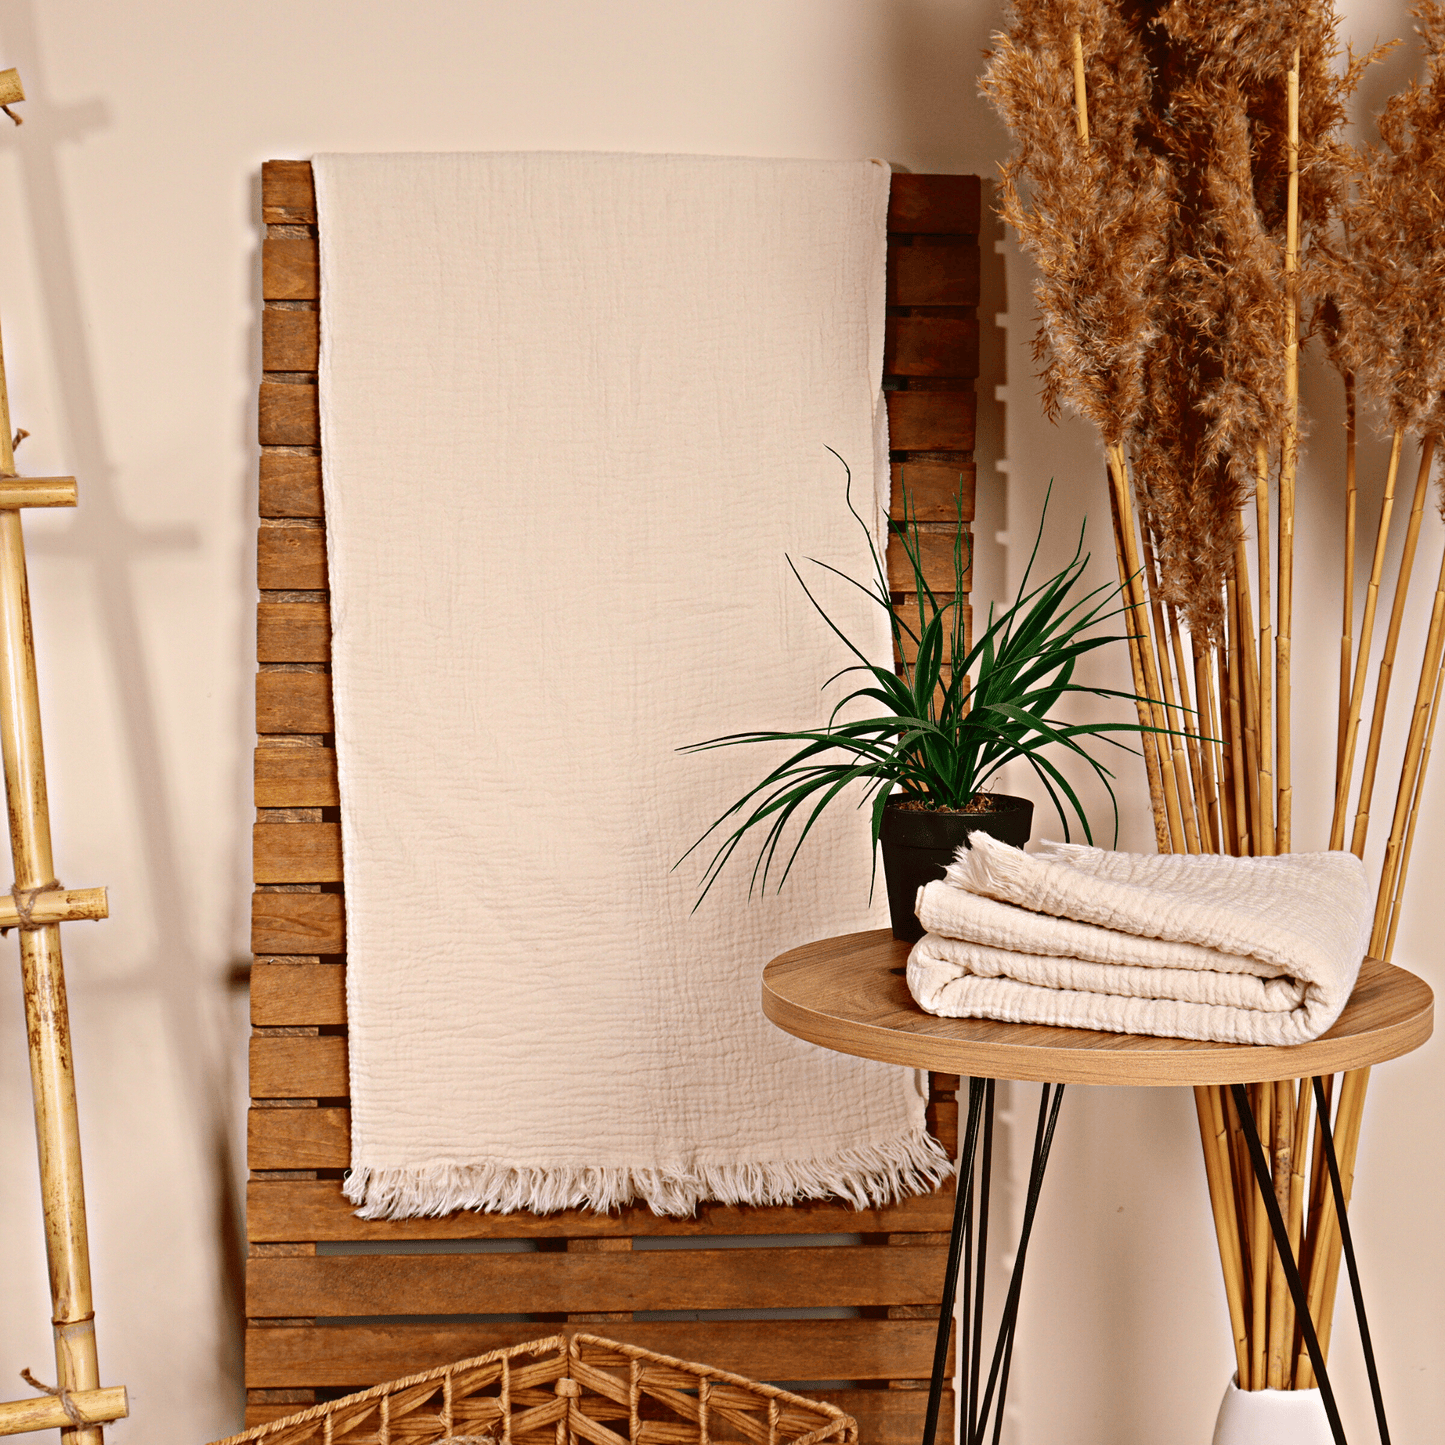 Natural Cream Muslin Towel for Adults